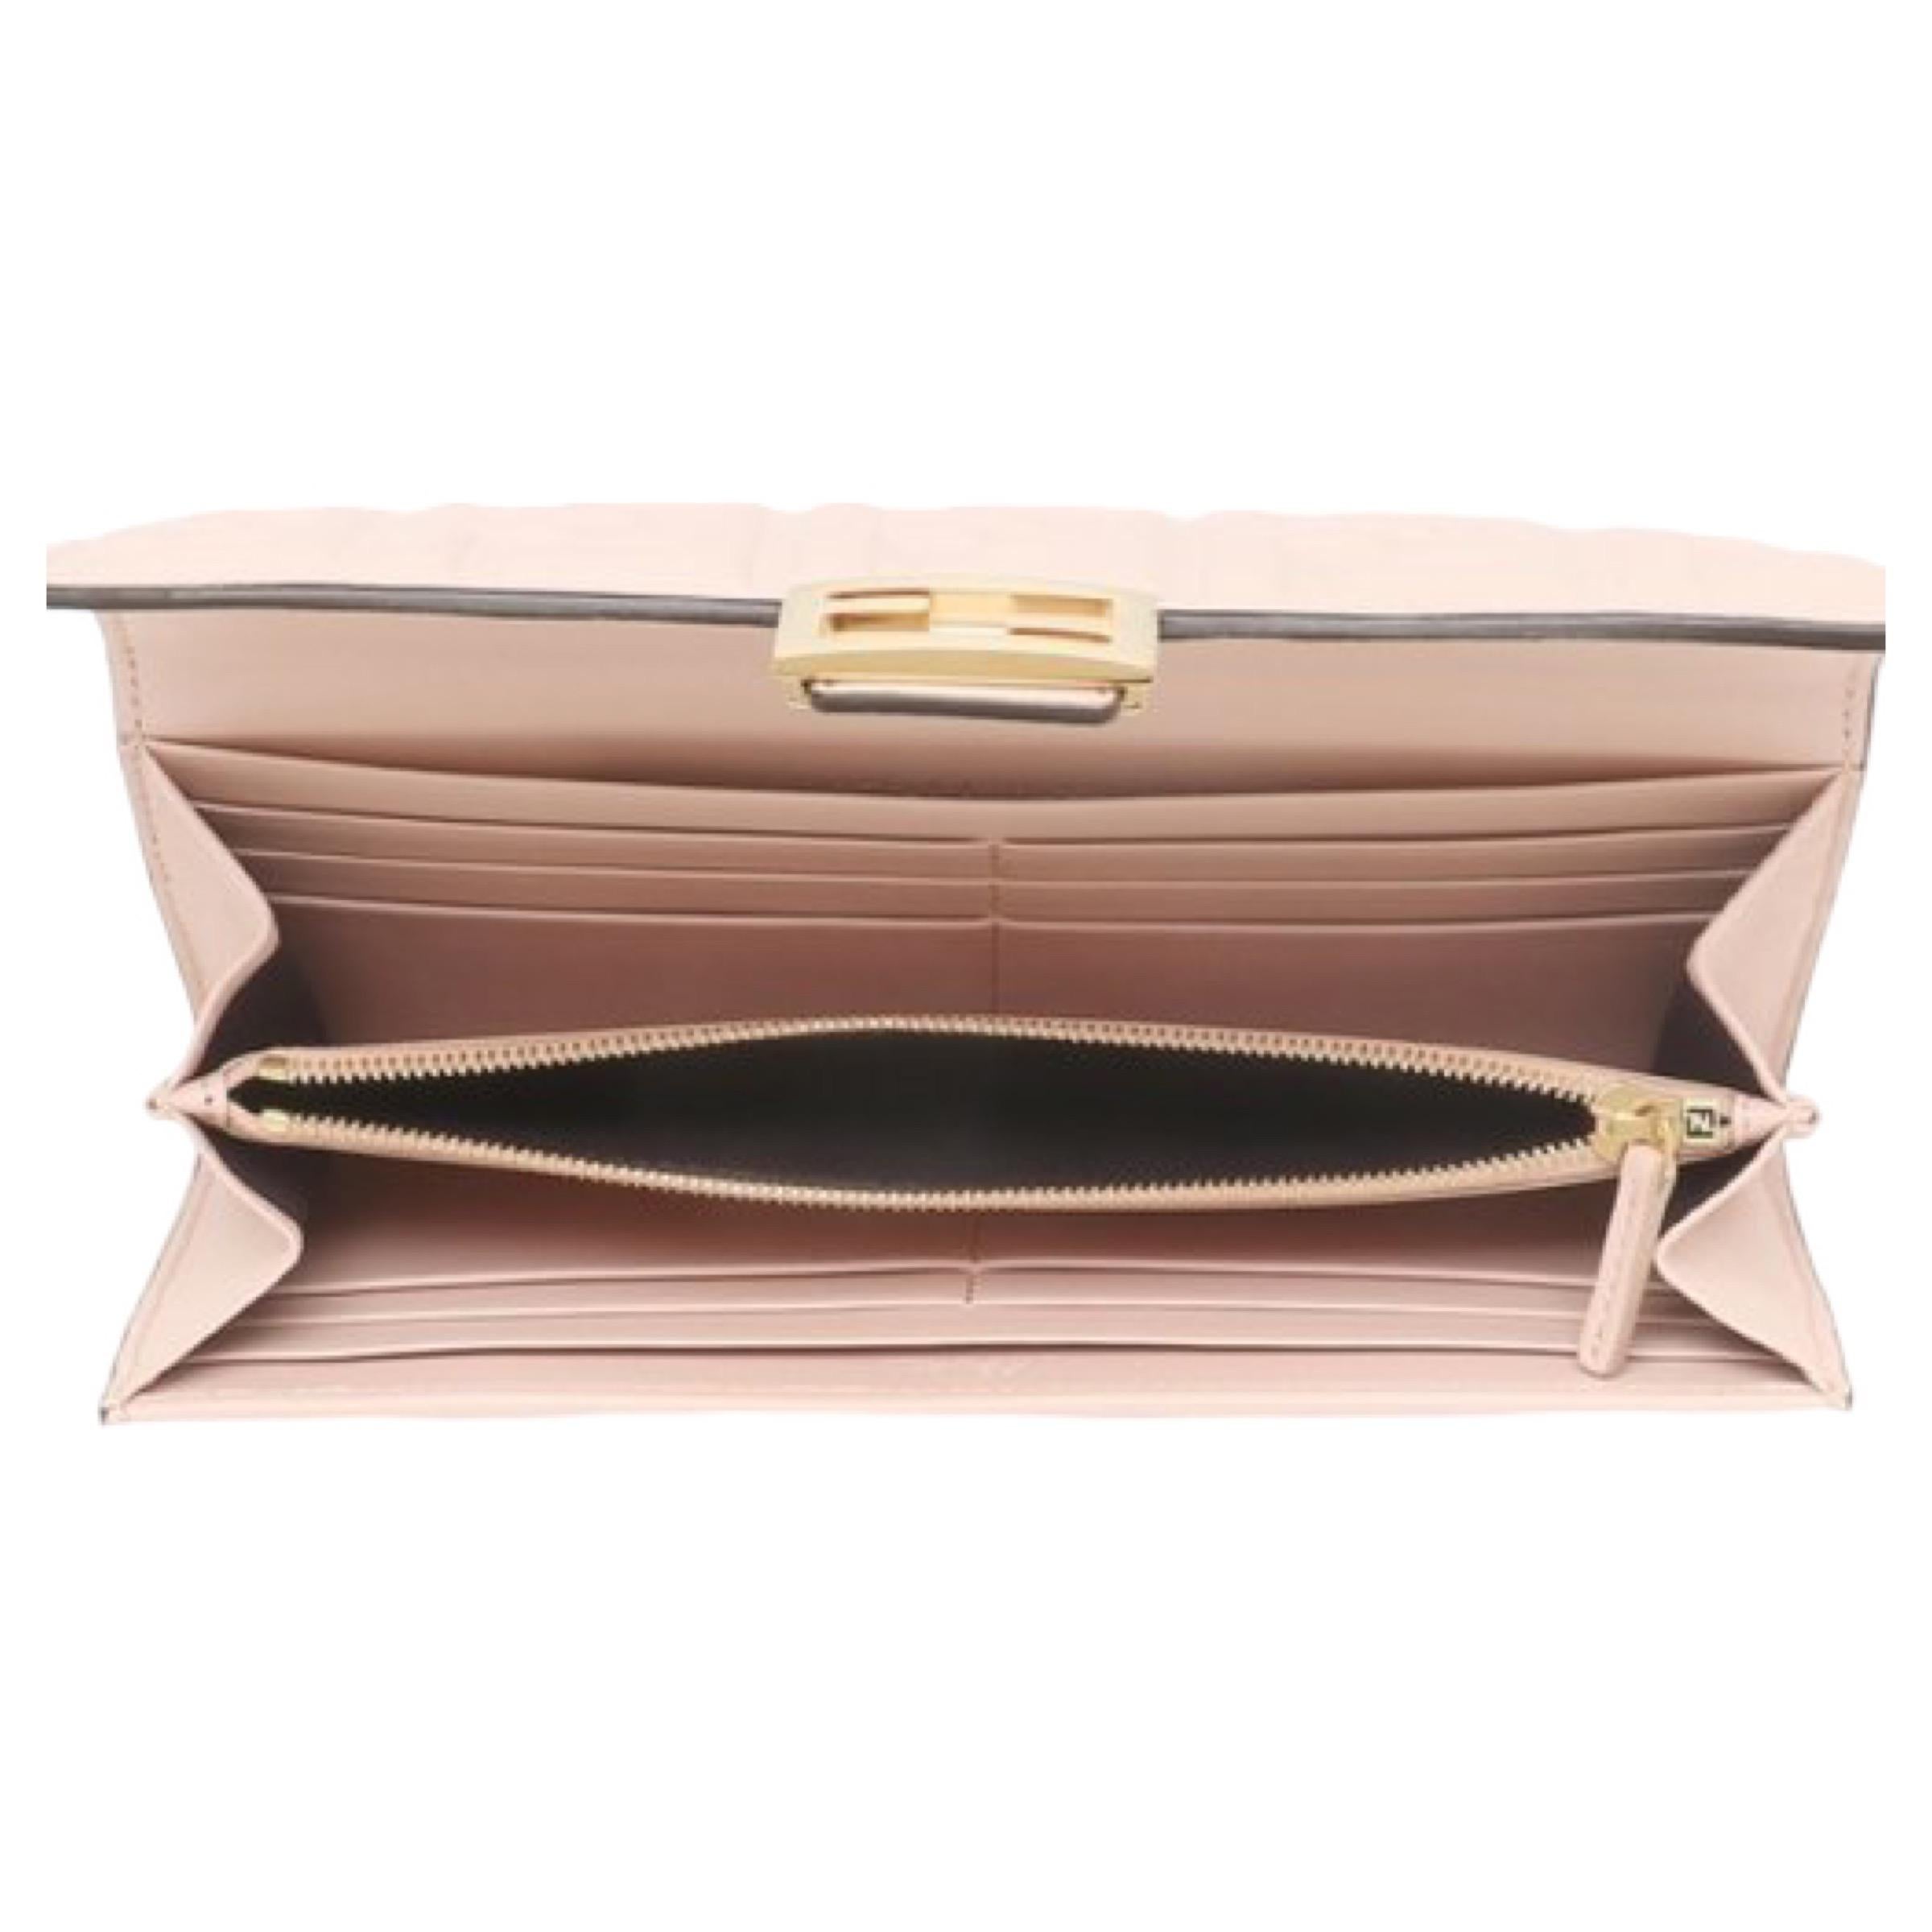 NEW Fendi Candy Pink Baguette FF Monogram Leather Continental Wallet Clutch Bag For Sale 1